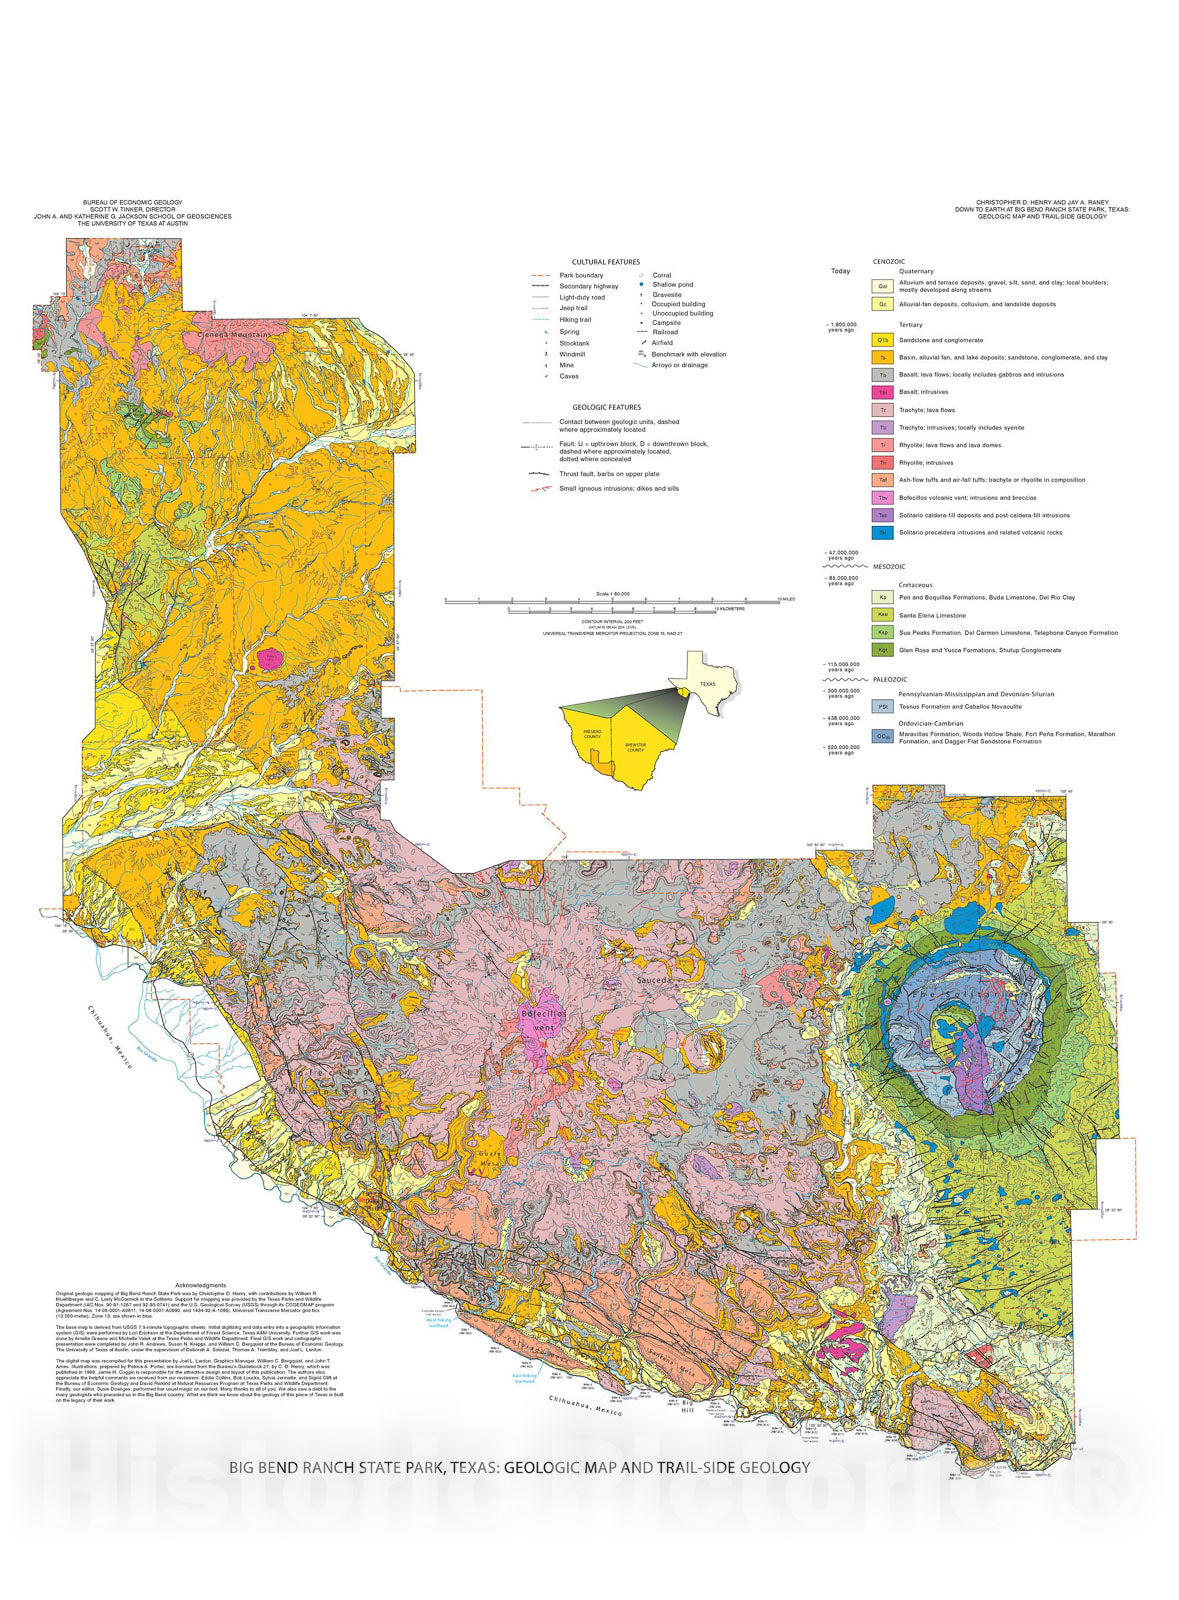 Map : Down to earth at Big Bend Ranch State Park, Texas:  geologic map and trail-side geology, 2002 Cartography Wall Art :